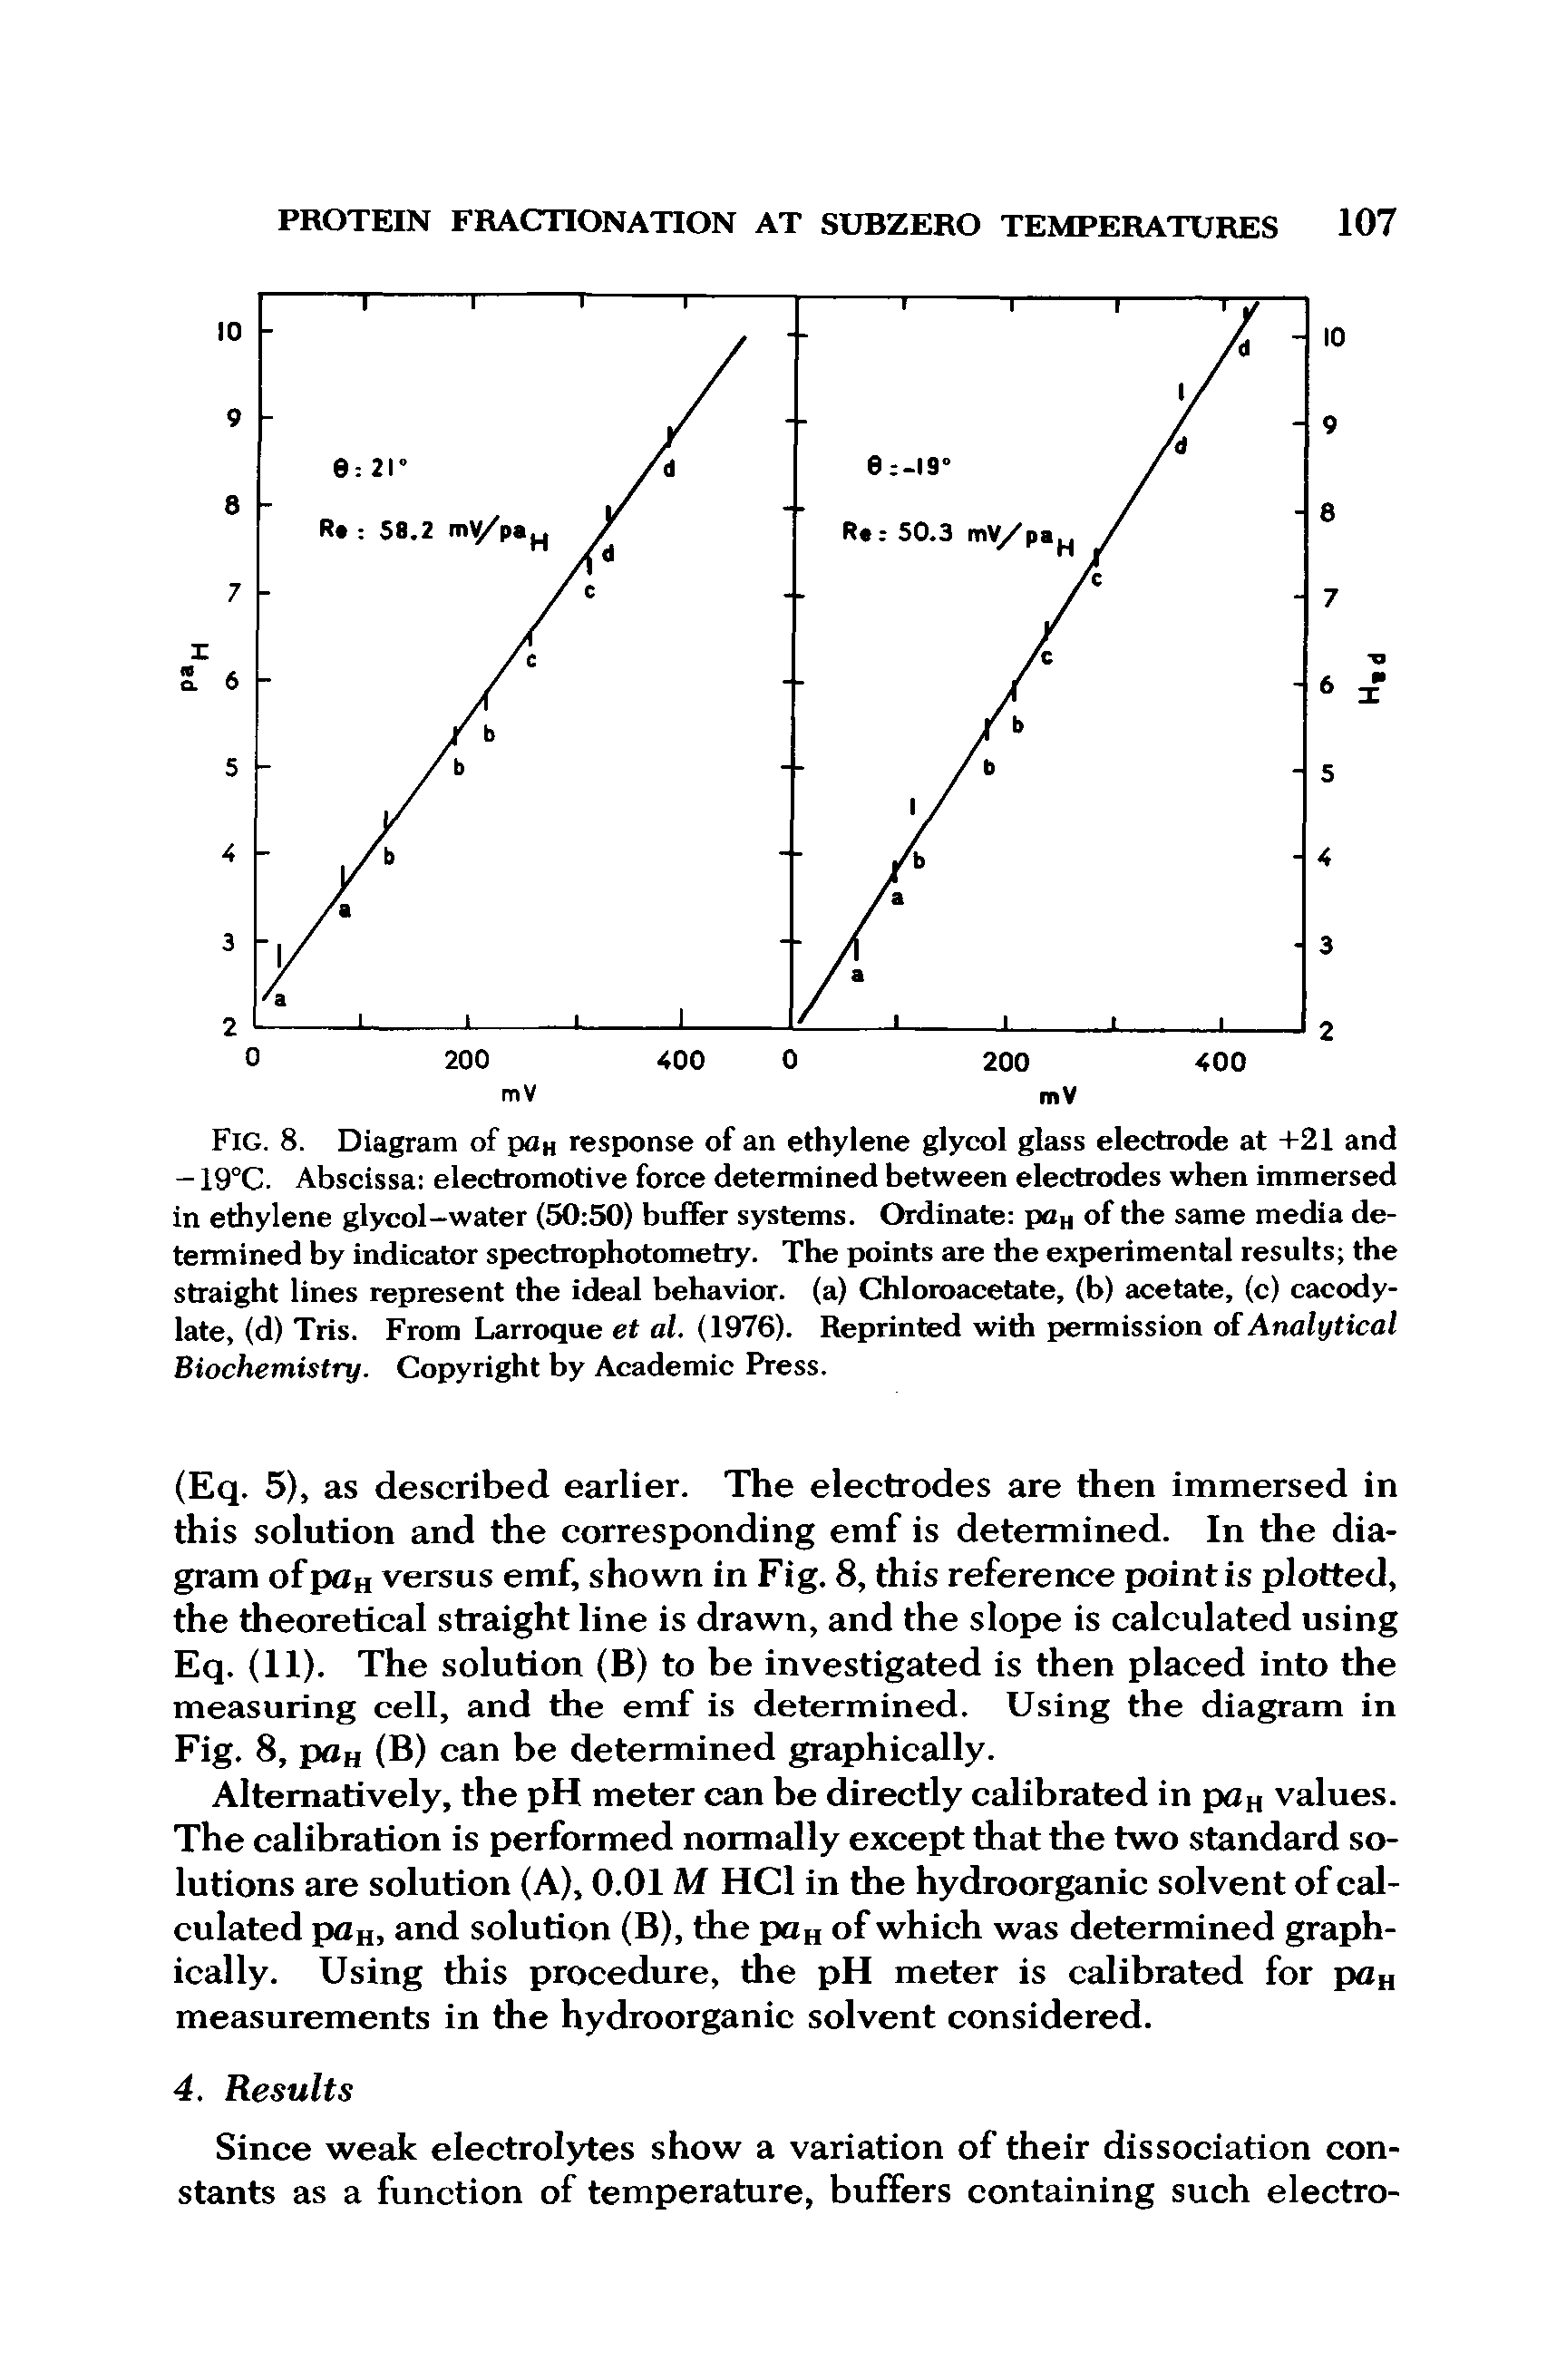 Fig. 8. Diagram of paH response of an ethylene glycol glass electrode at +21 and - 19°C. Abscissa electromotive force determined between electrodes when immersed in ethylene glycol-water (50 50) buffer systems. Ordinate paH of the same media determined by indicator spectrophotometry. The points are the experimental results the straight lines represent the ideal behavior, (a) Chloroacetate, (b) acetate, (c) cacody-late, (d) Tris. From Larroque et al. (1976). Reprinted with permission of Analytical Biochemistry. Copyright by Academic Press.